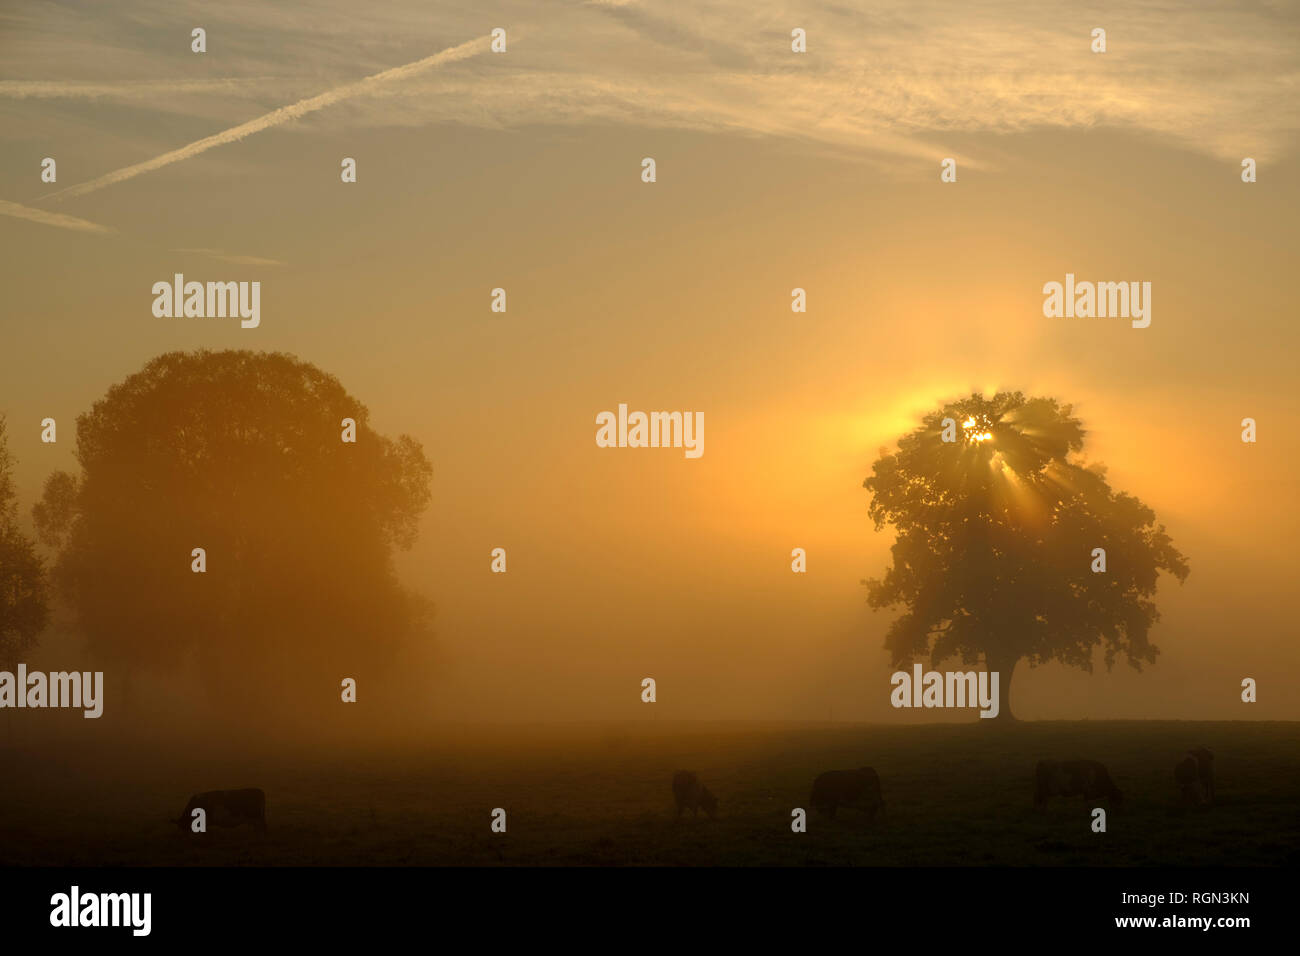 Germany, Pfaffenwinkel, view of landscape with two trees at sunrise Stock Photo